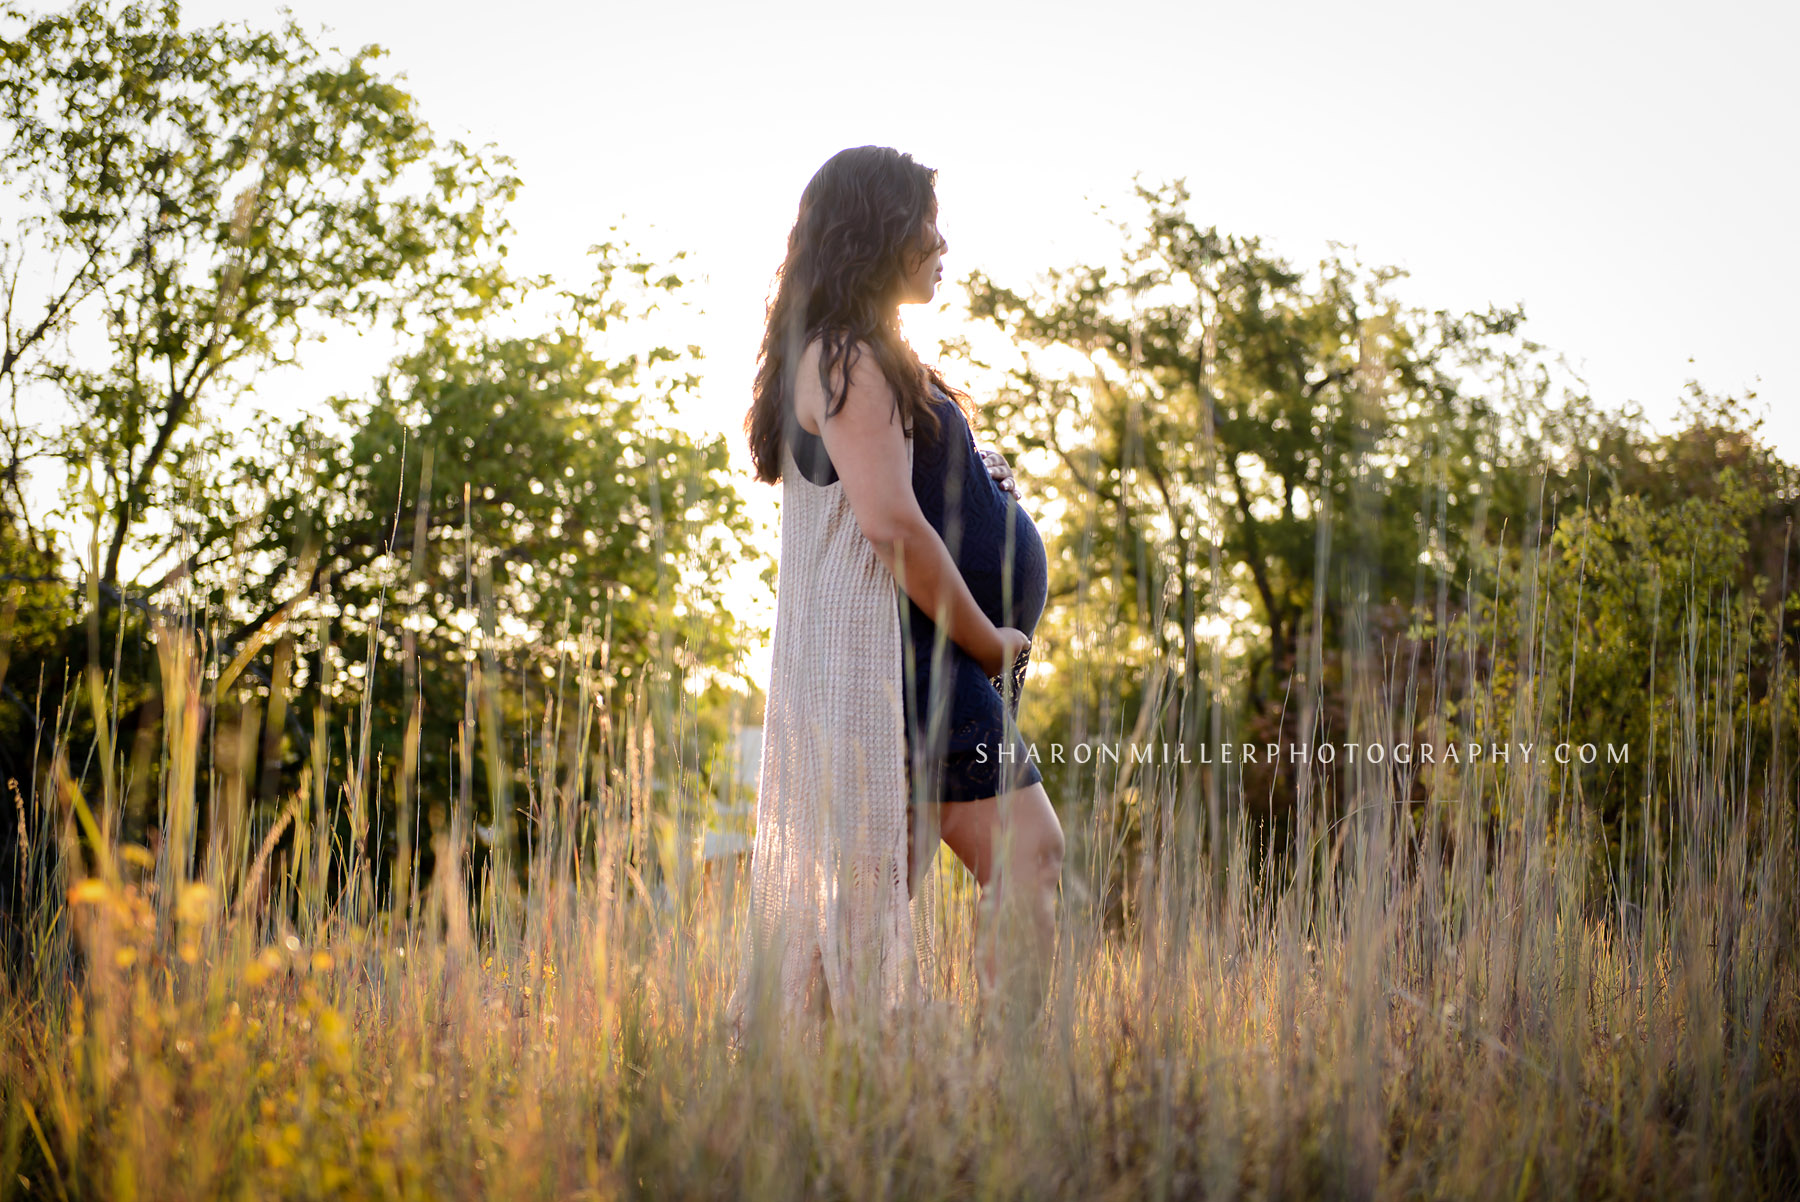 boho chic maternity session in a field of golden grass